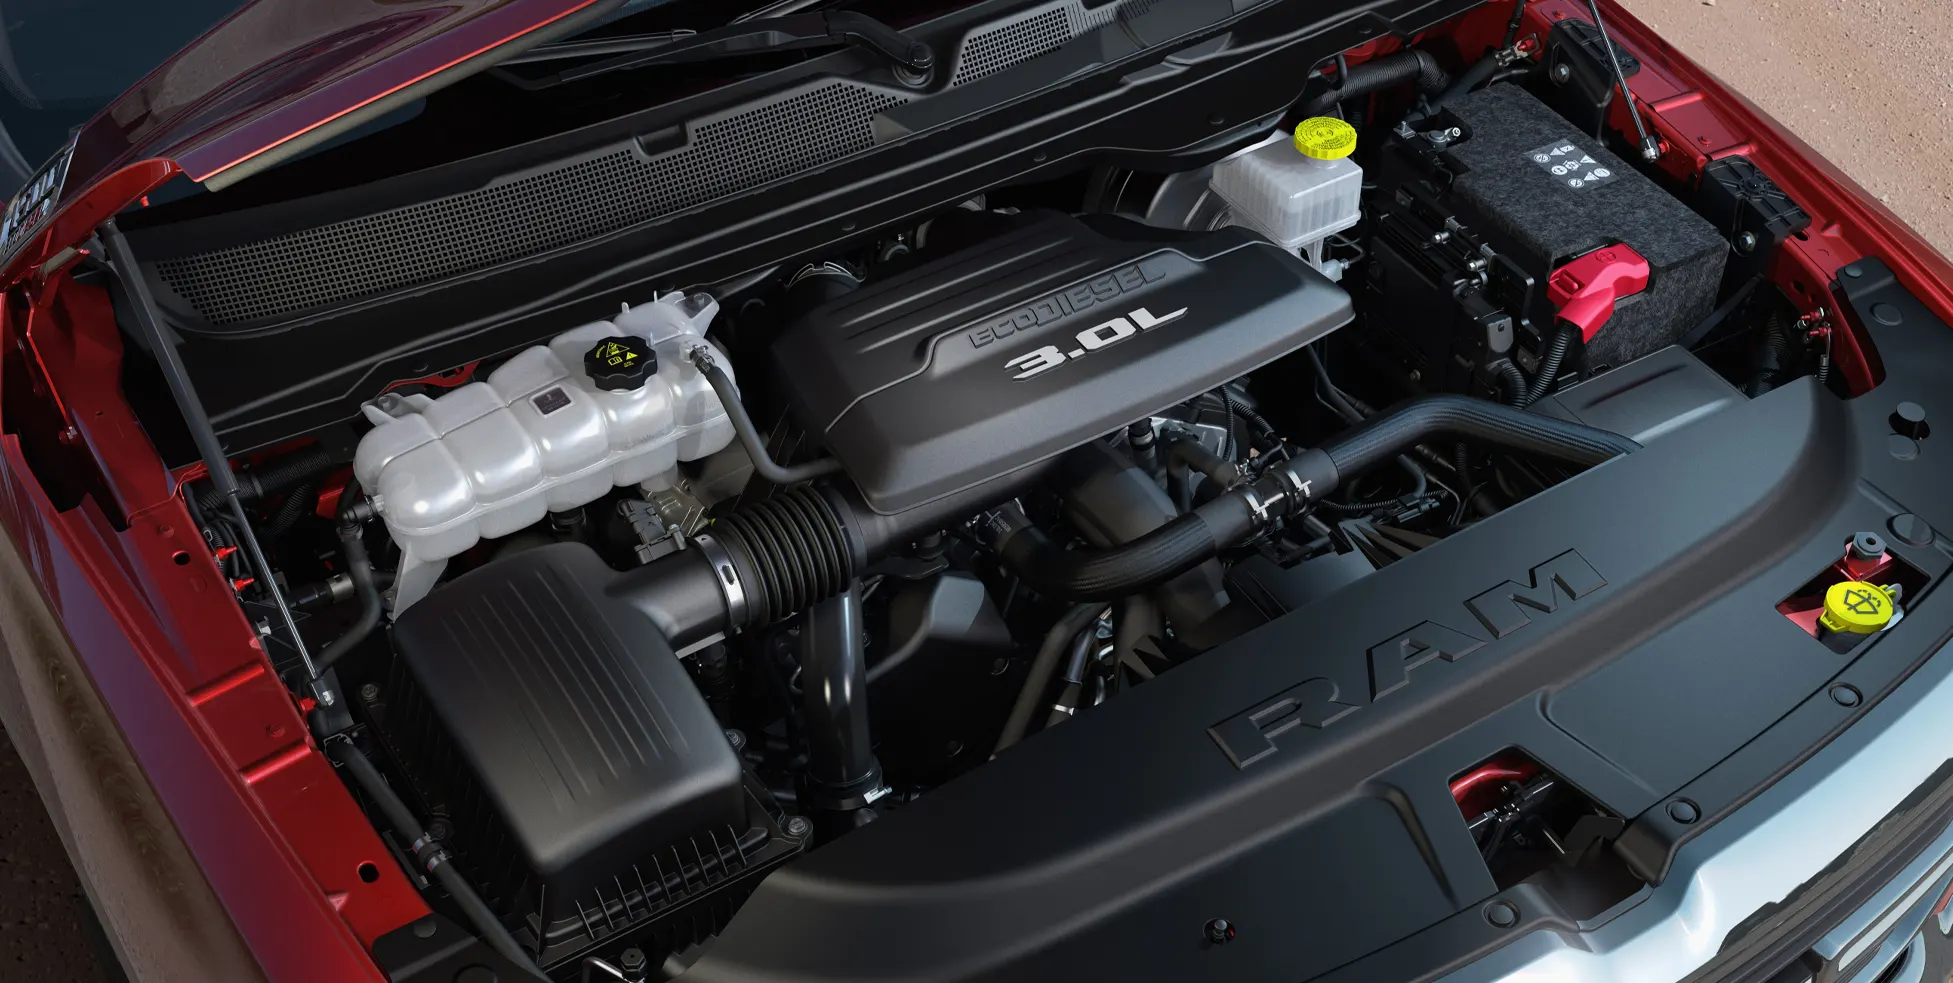 Open hood of RAM 1500 showing off the efficient 3.0L EcoDiesel V6 engine